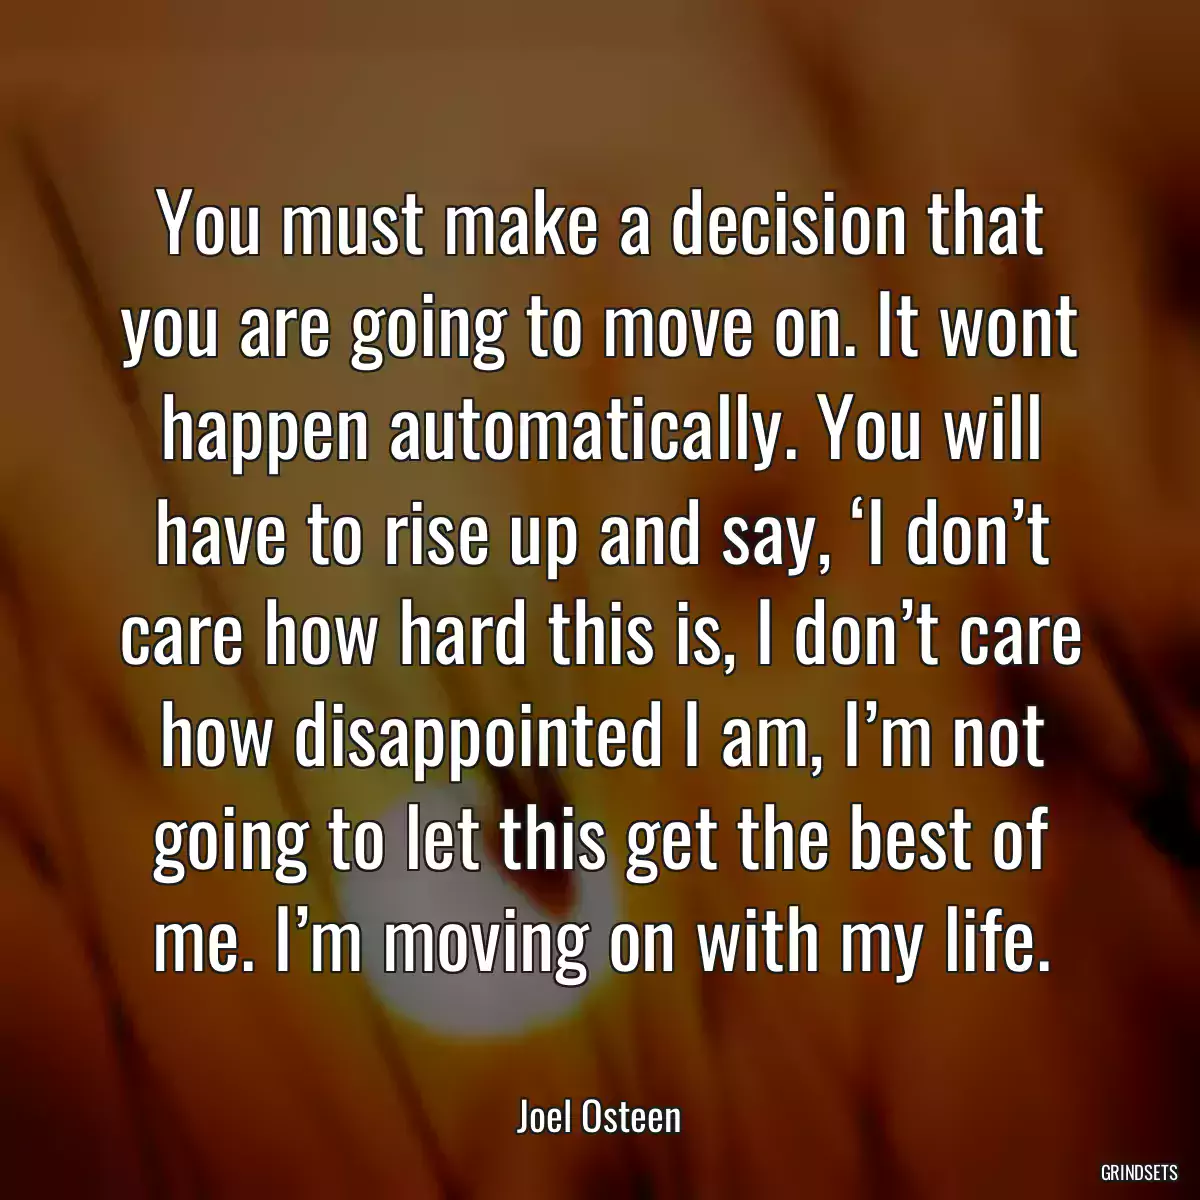 You must make a decision that you are going to move on. It wont happen automatically. You will have to rise up and say, ‘I don’t care how hard this is, I don’t care how disappointed I am, I’m not going to let this get the best of me. I’m moving on with my life.